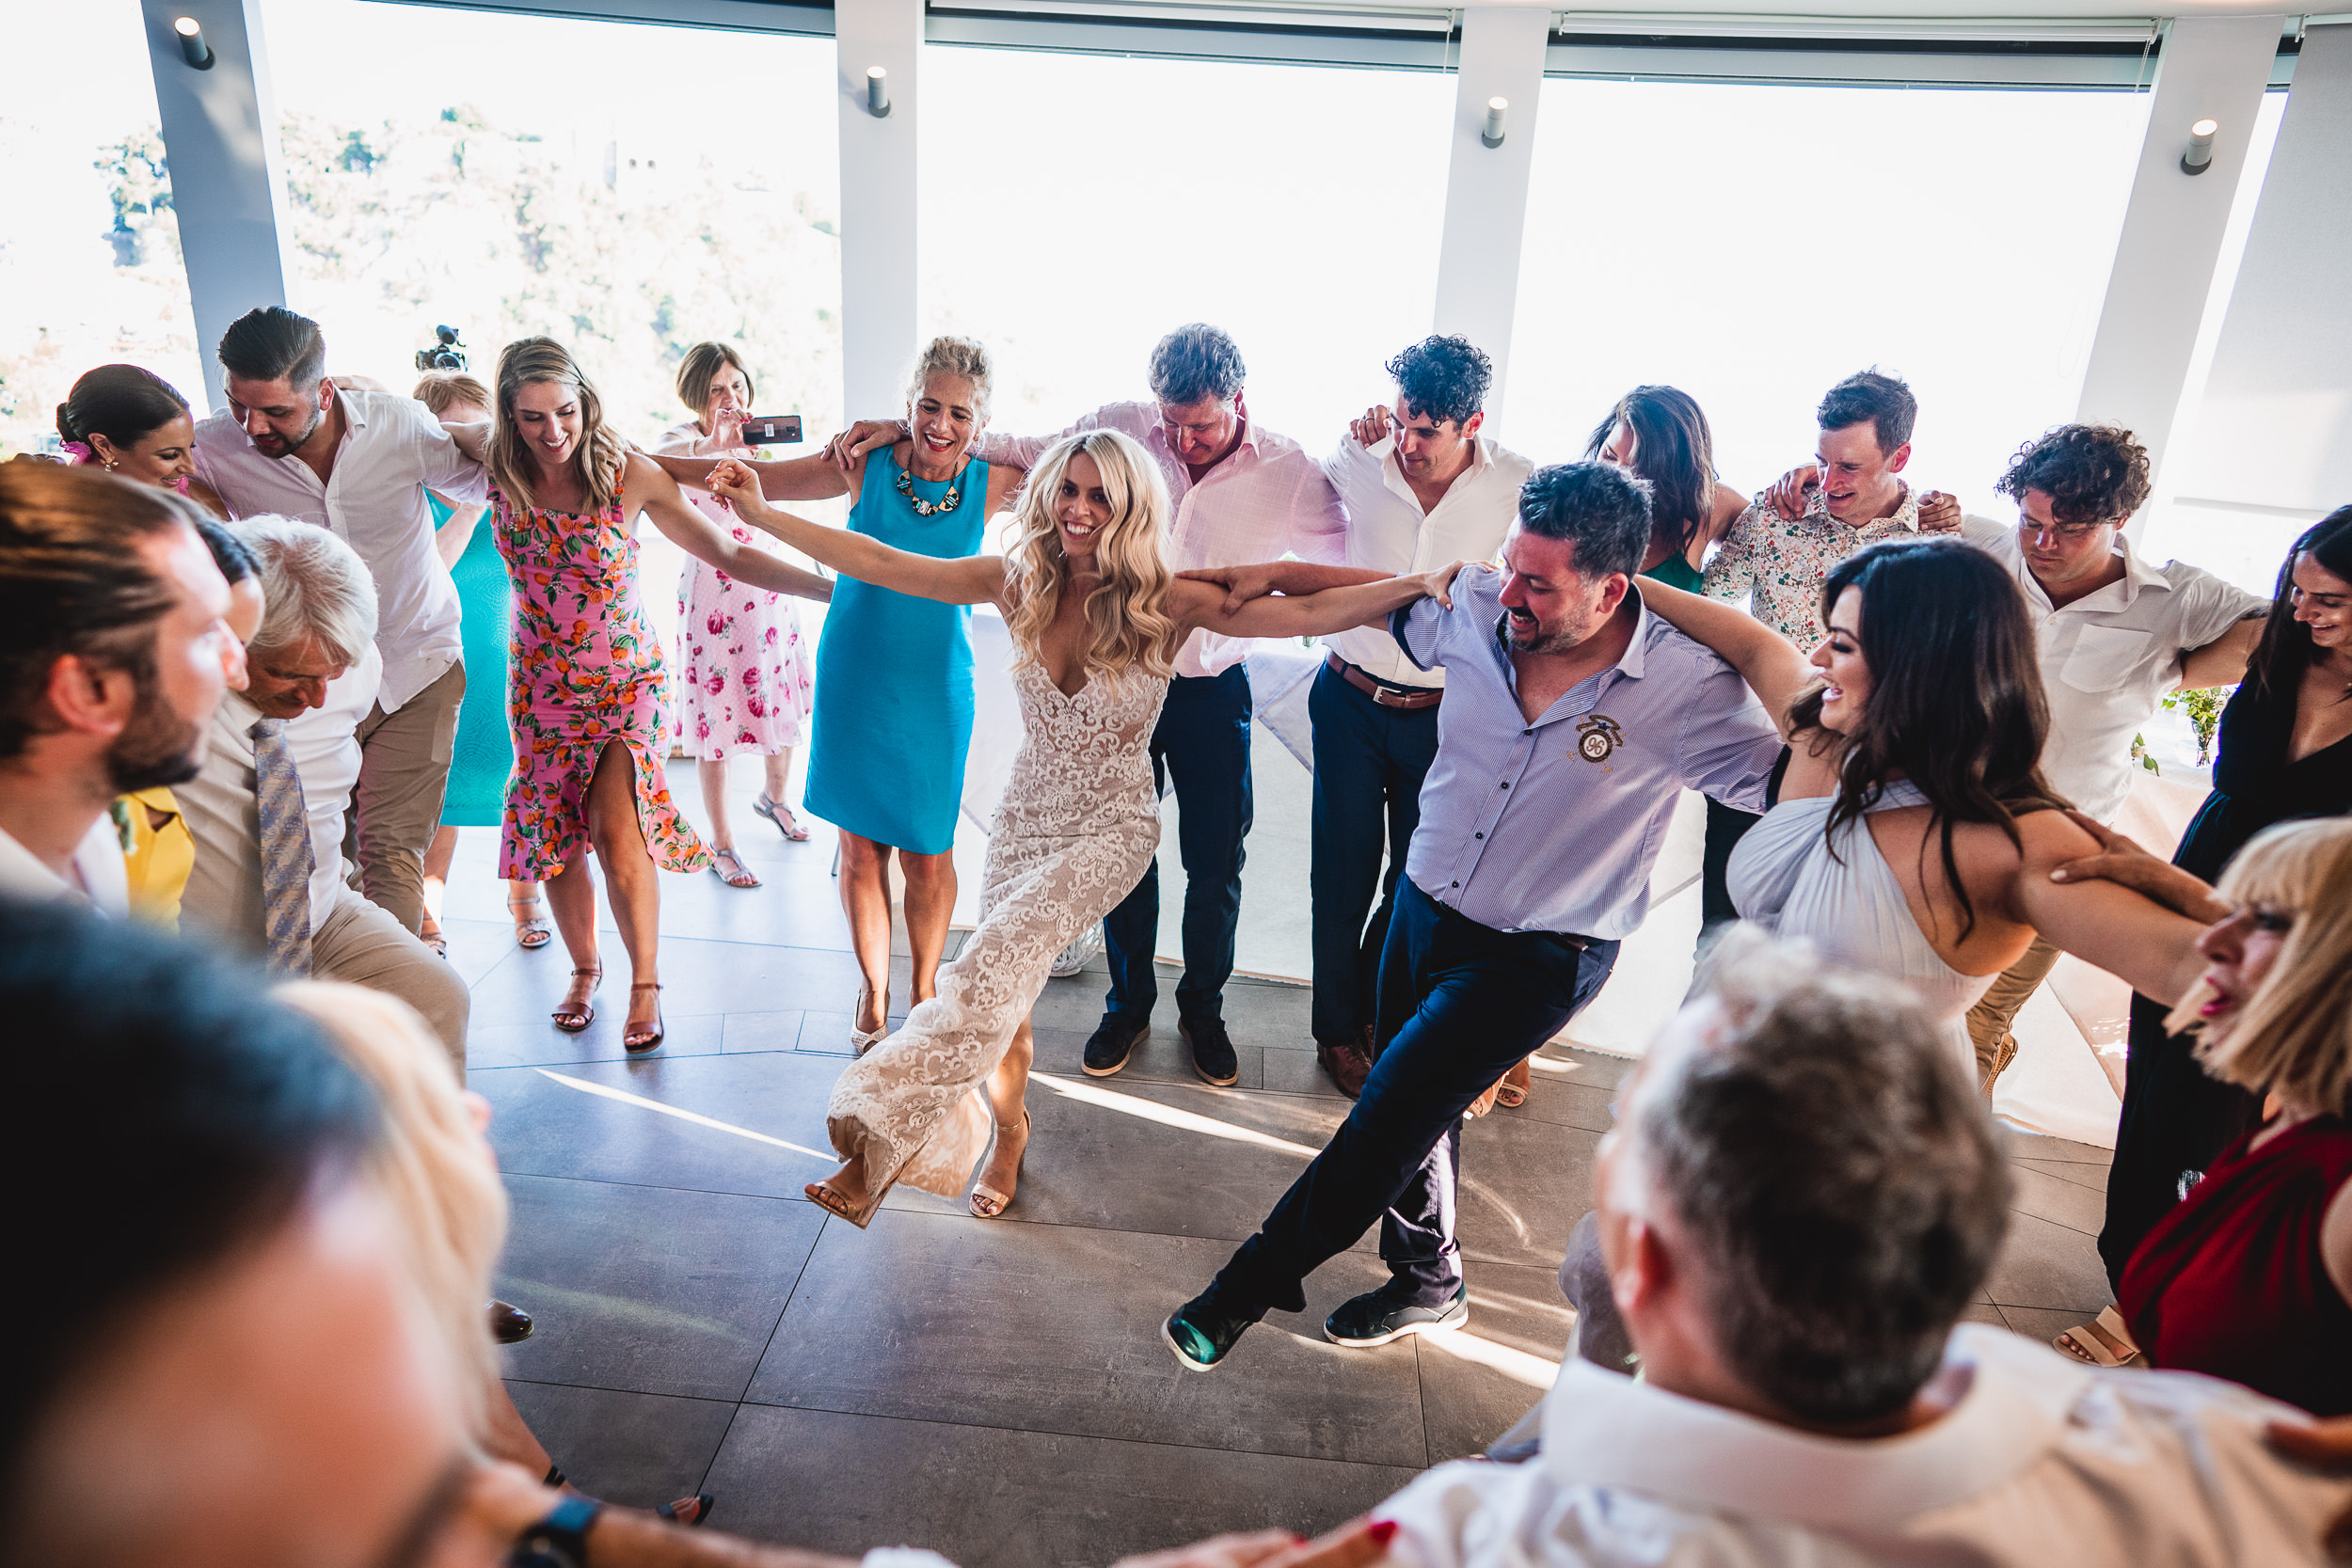 A group of people dancing at a wedding reception, photographed by the wedding photographer.